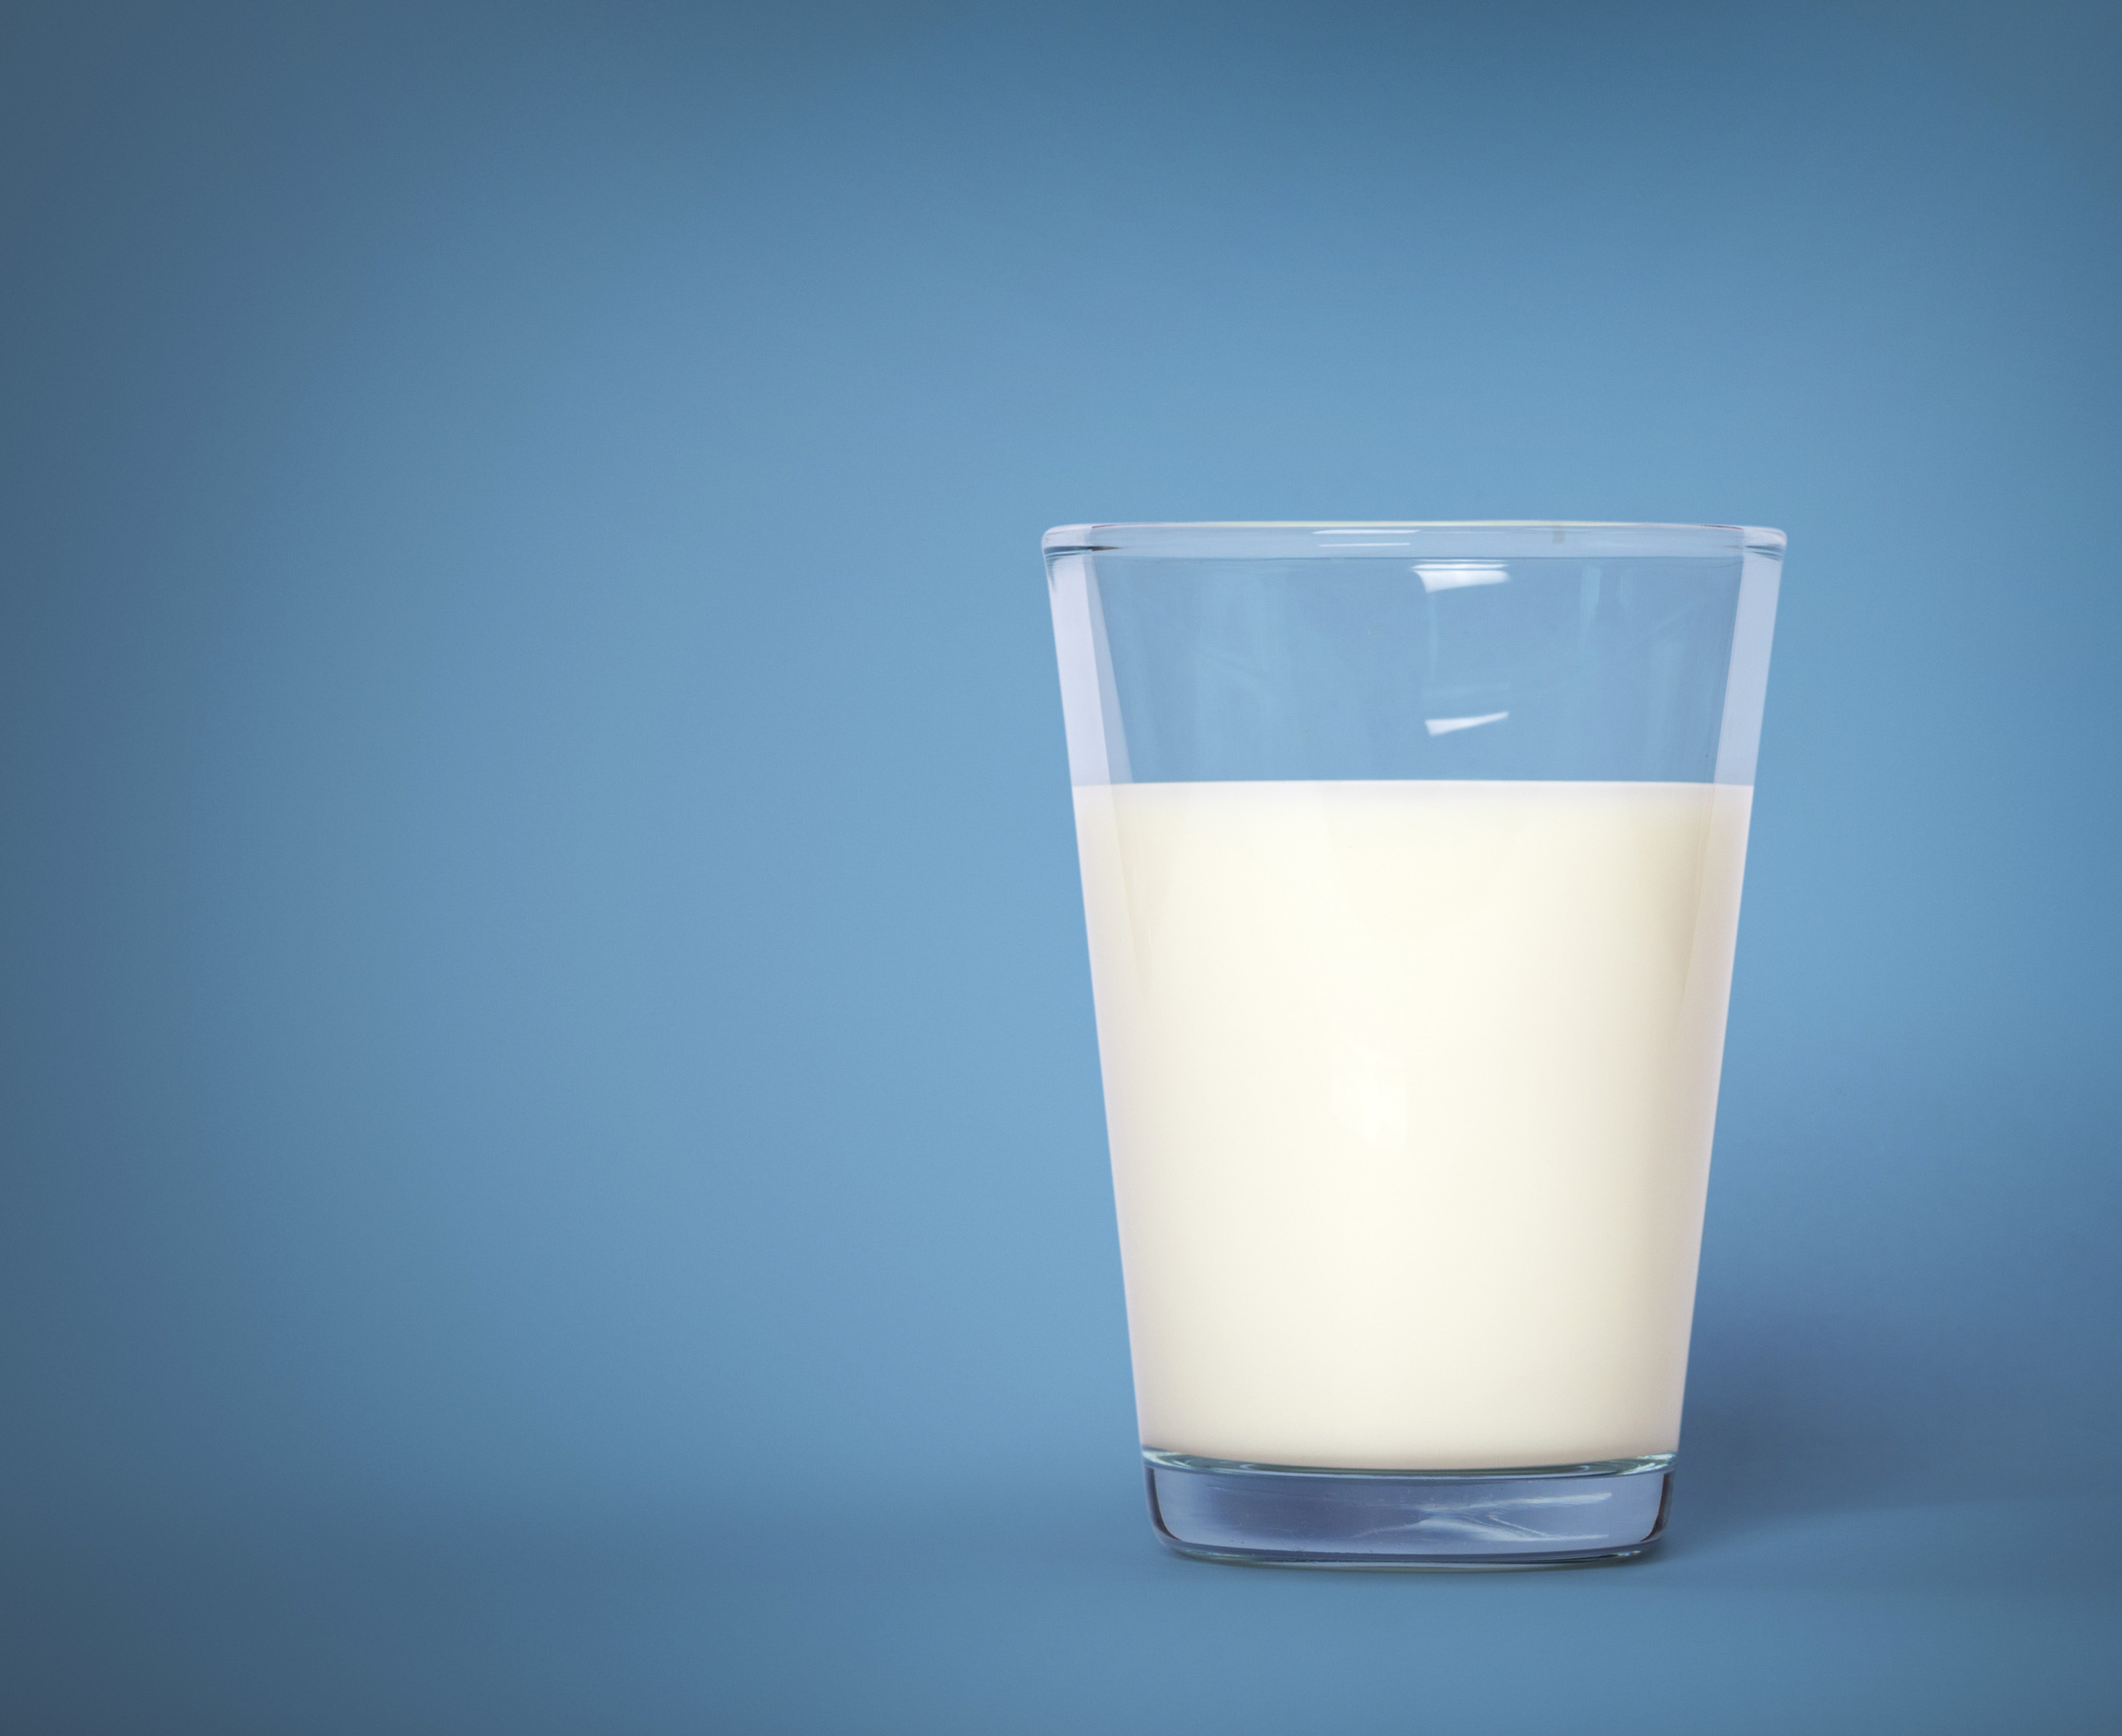 Can Drinking Too Much Milk Make Your Bones More Brittle? – Health ...